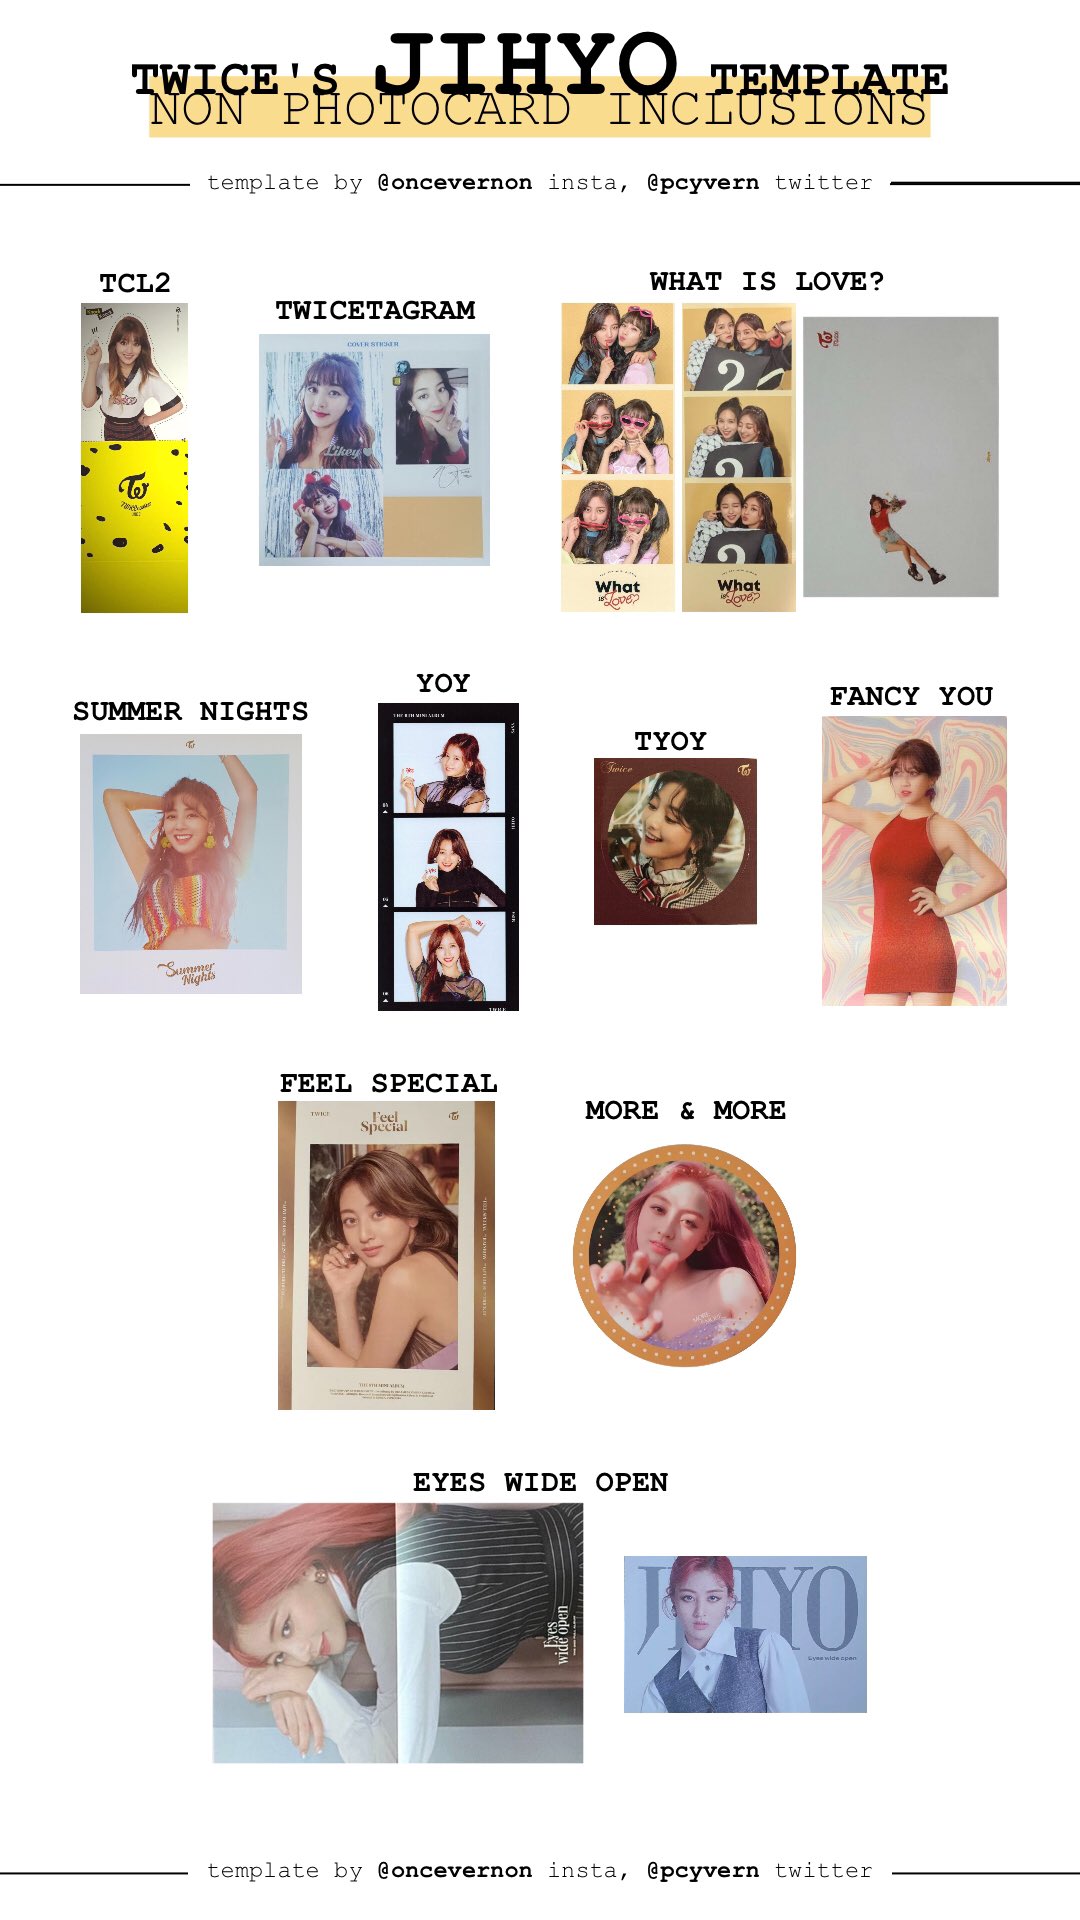 bella on X: update to the twice korean album covers template with all  versions of ready to be added!  / X